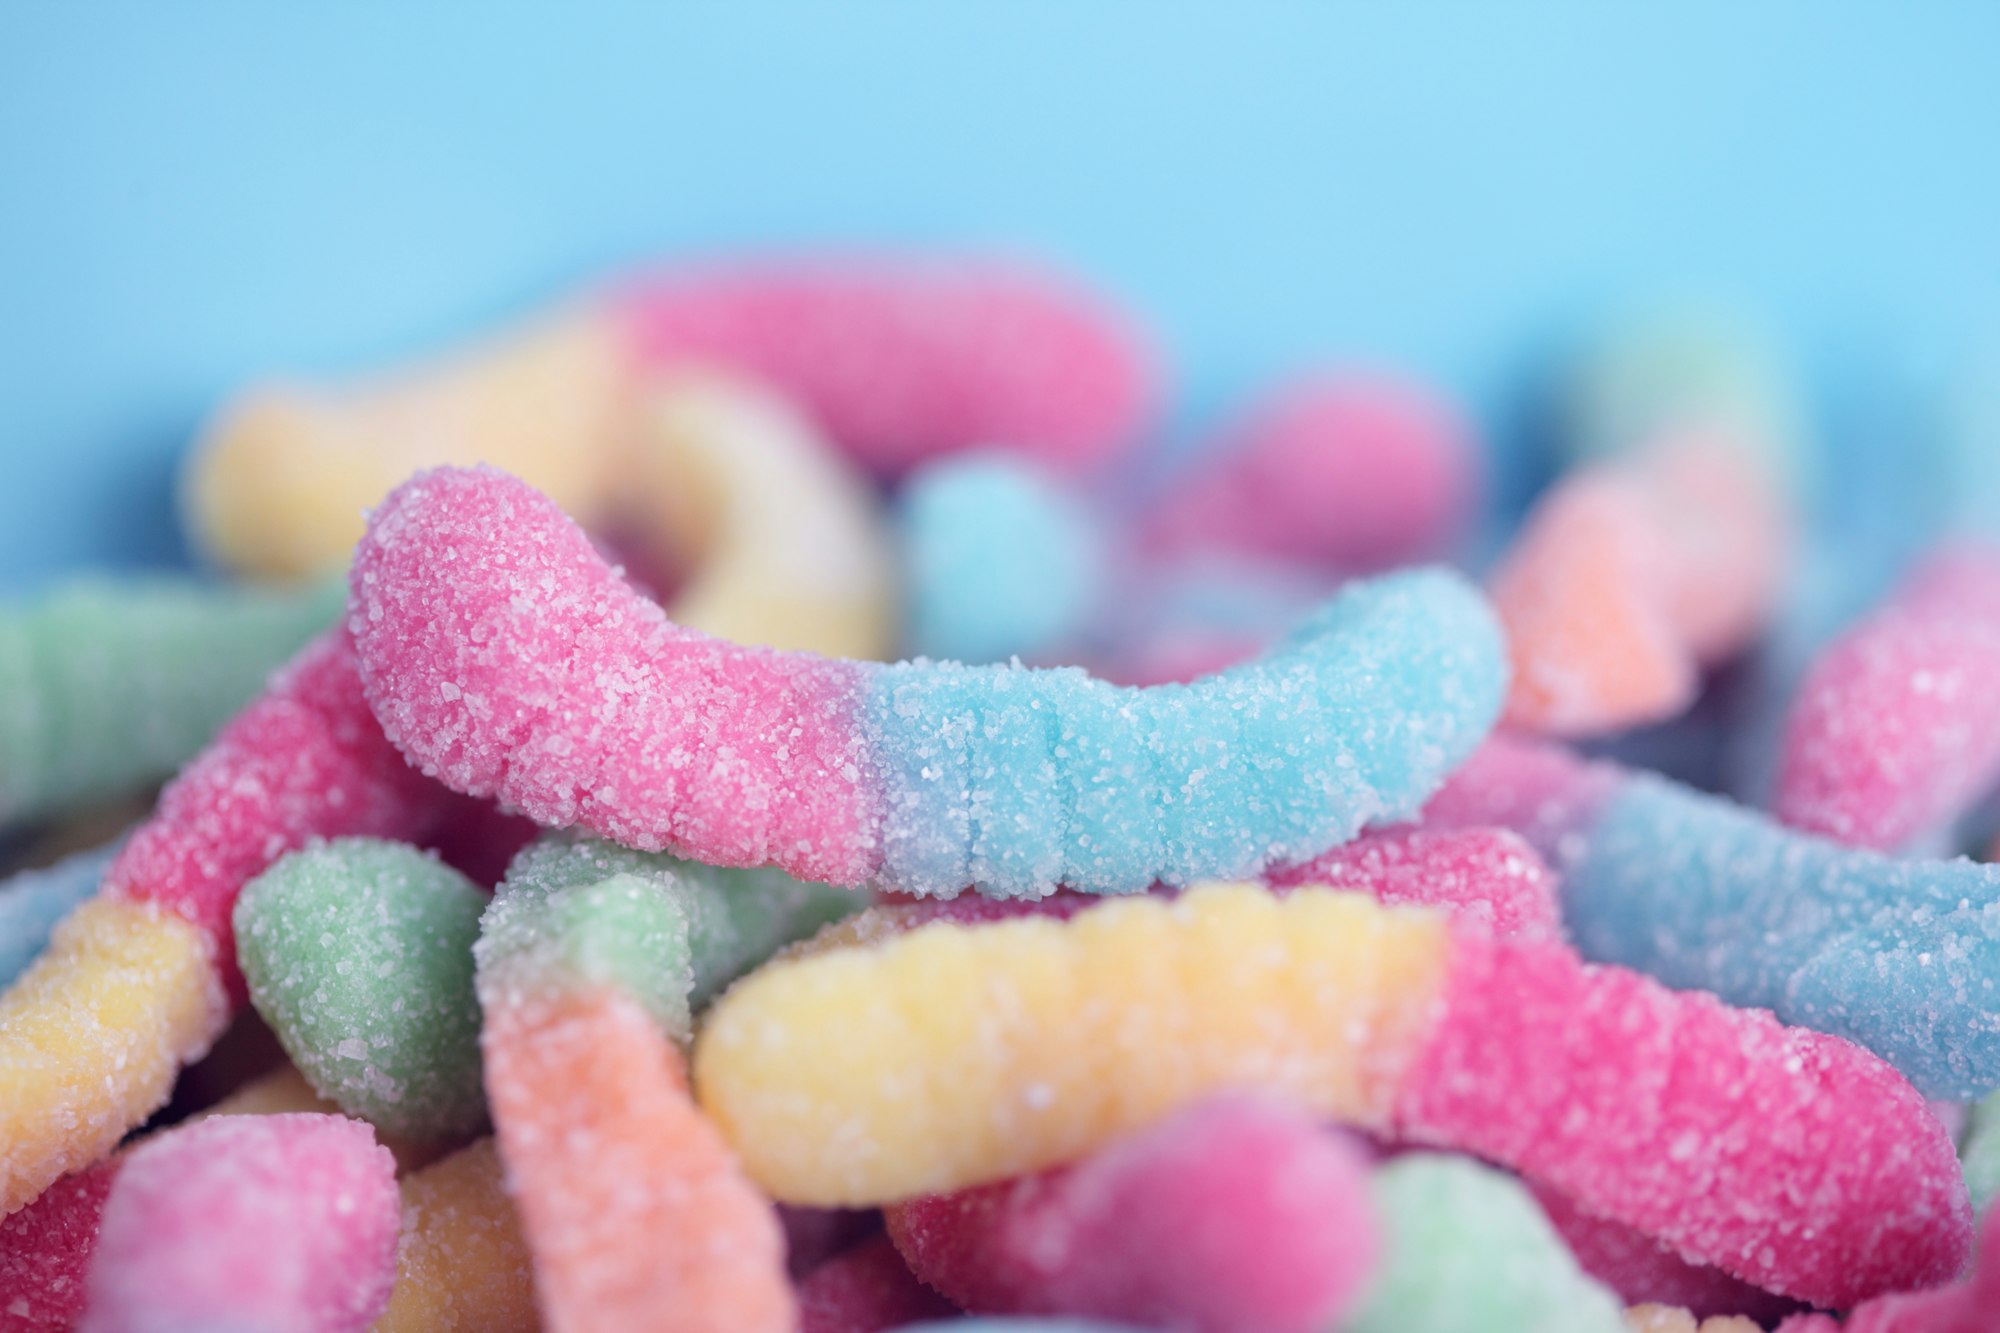 Close up image of sweet and sour gummy worms.